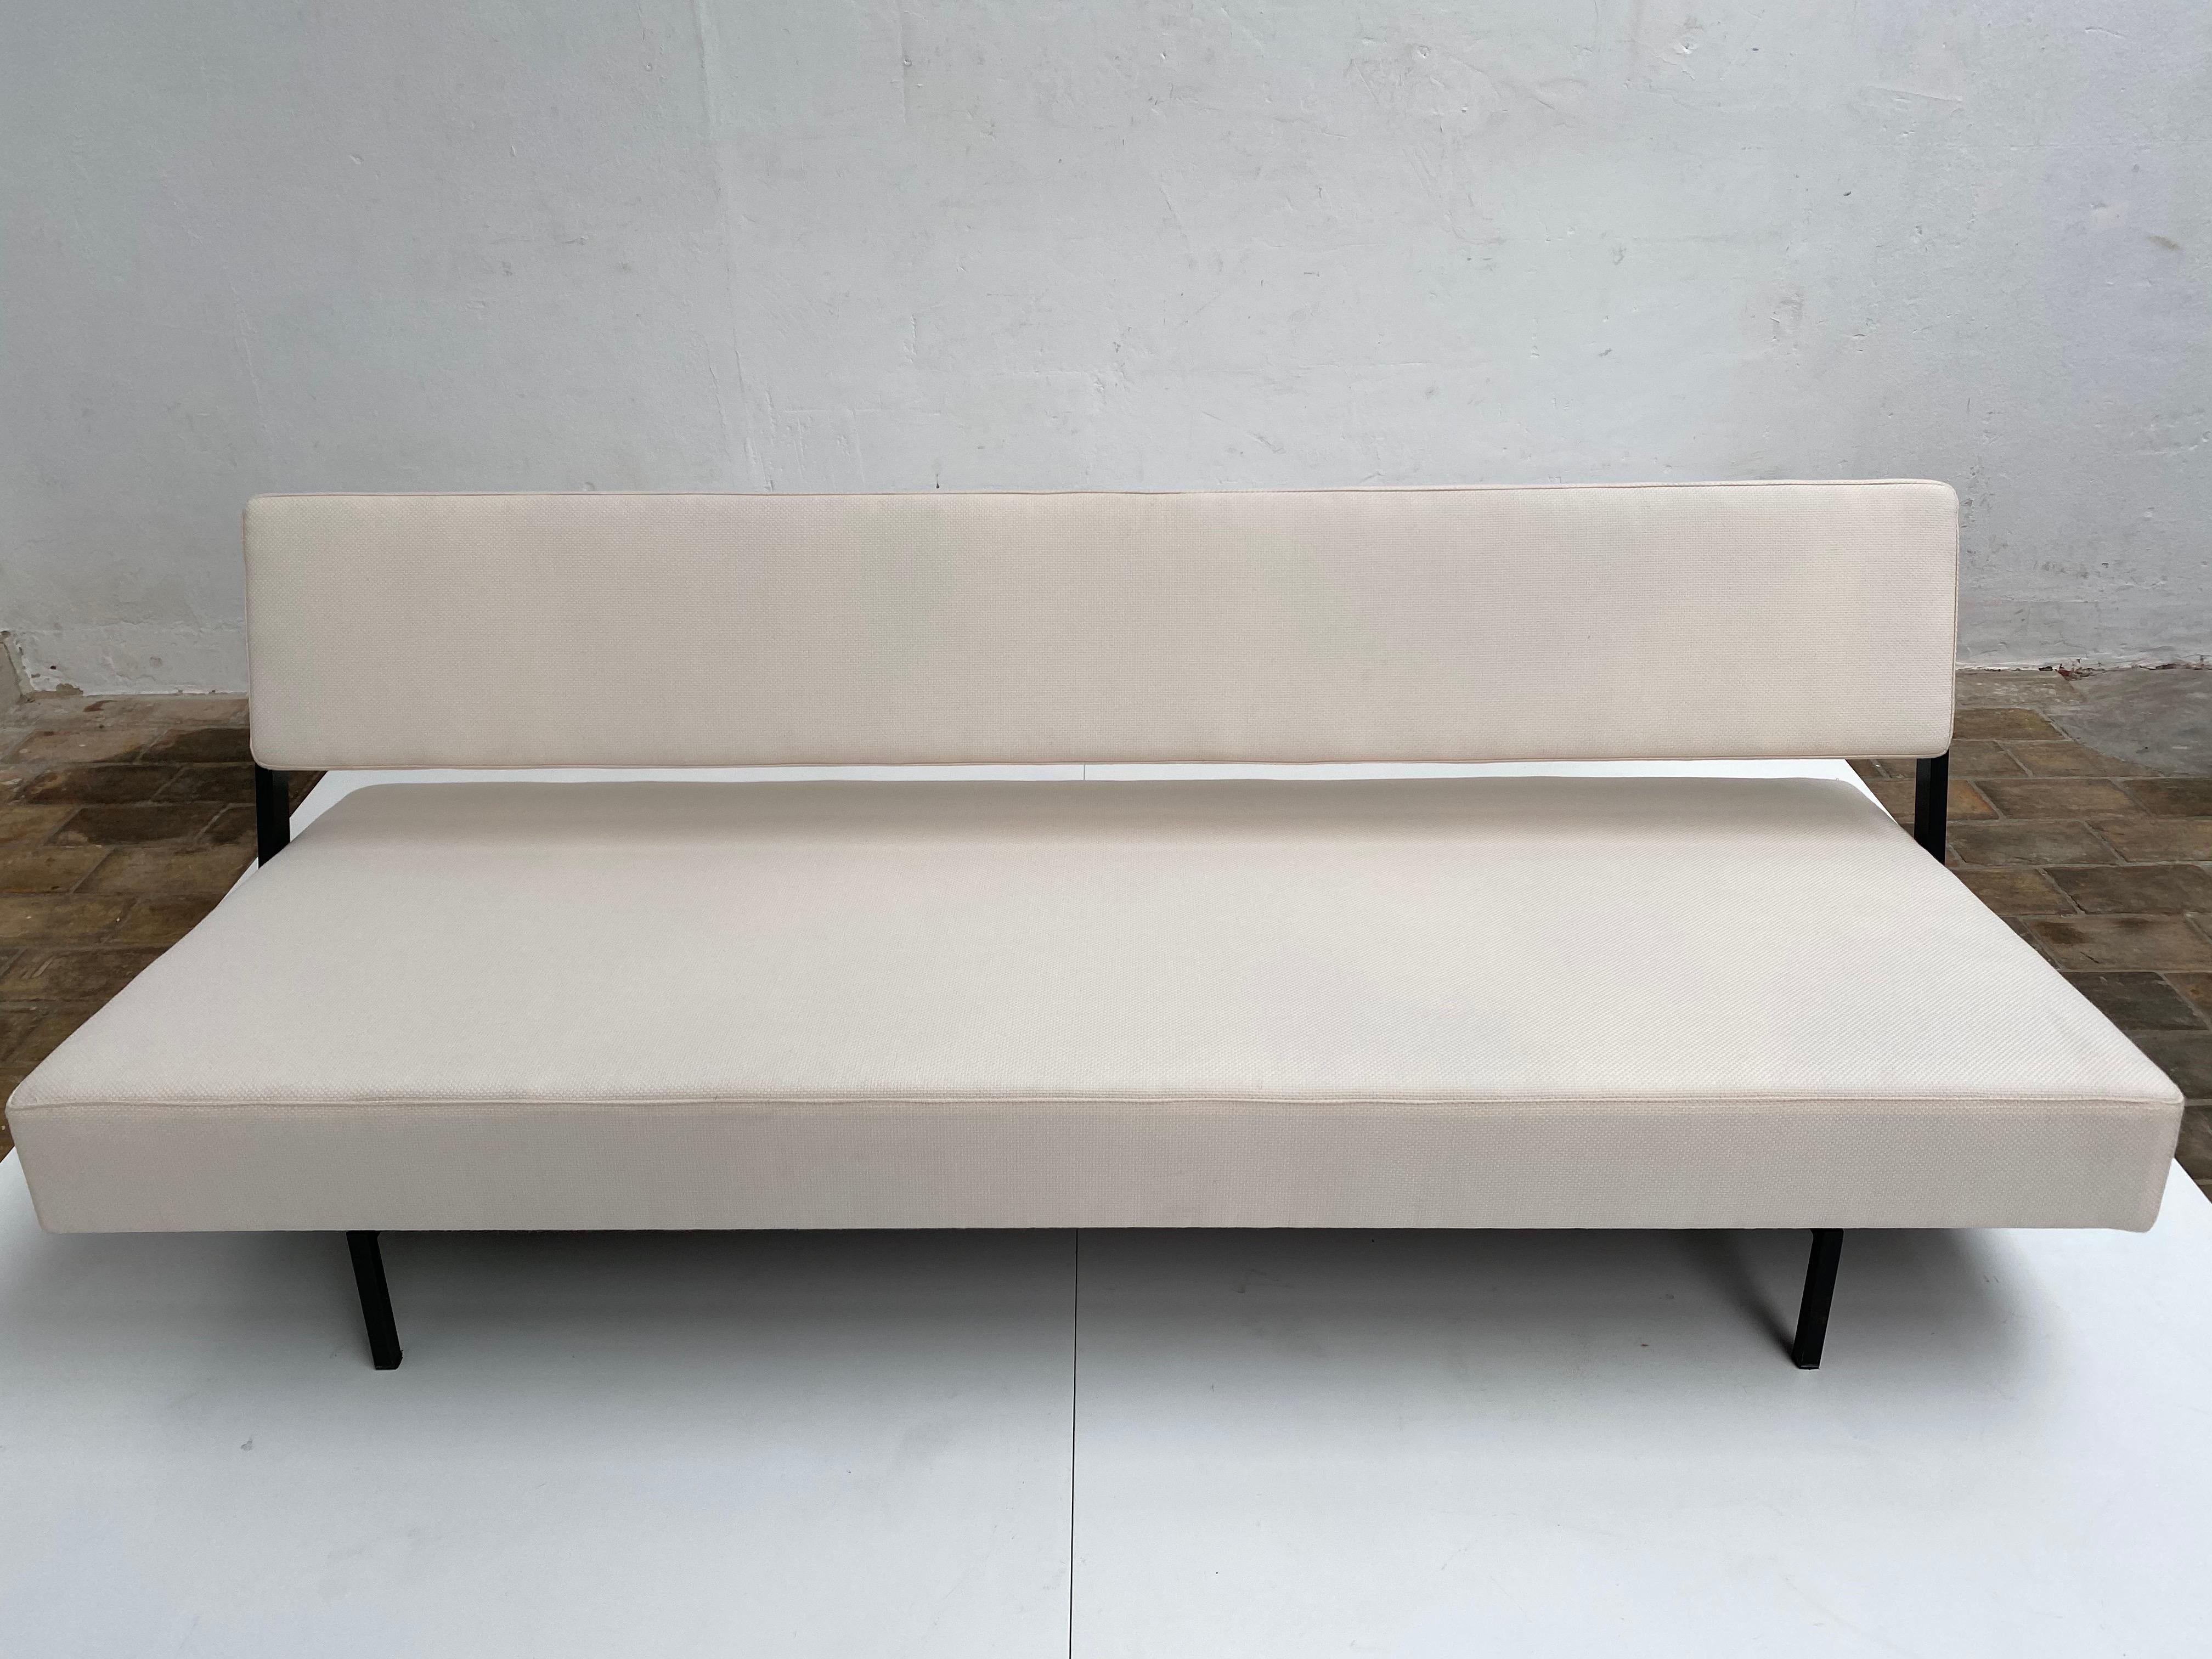 Mid-20th Century Space Saving Sleeping Sofa Minimal Design 1950s, Auping, the Netherlands For Sale